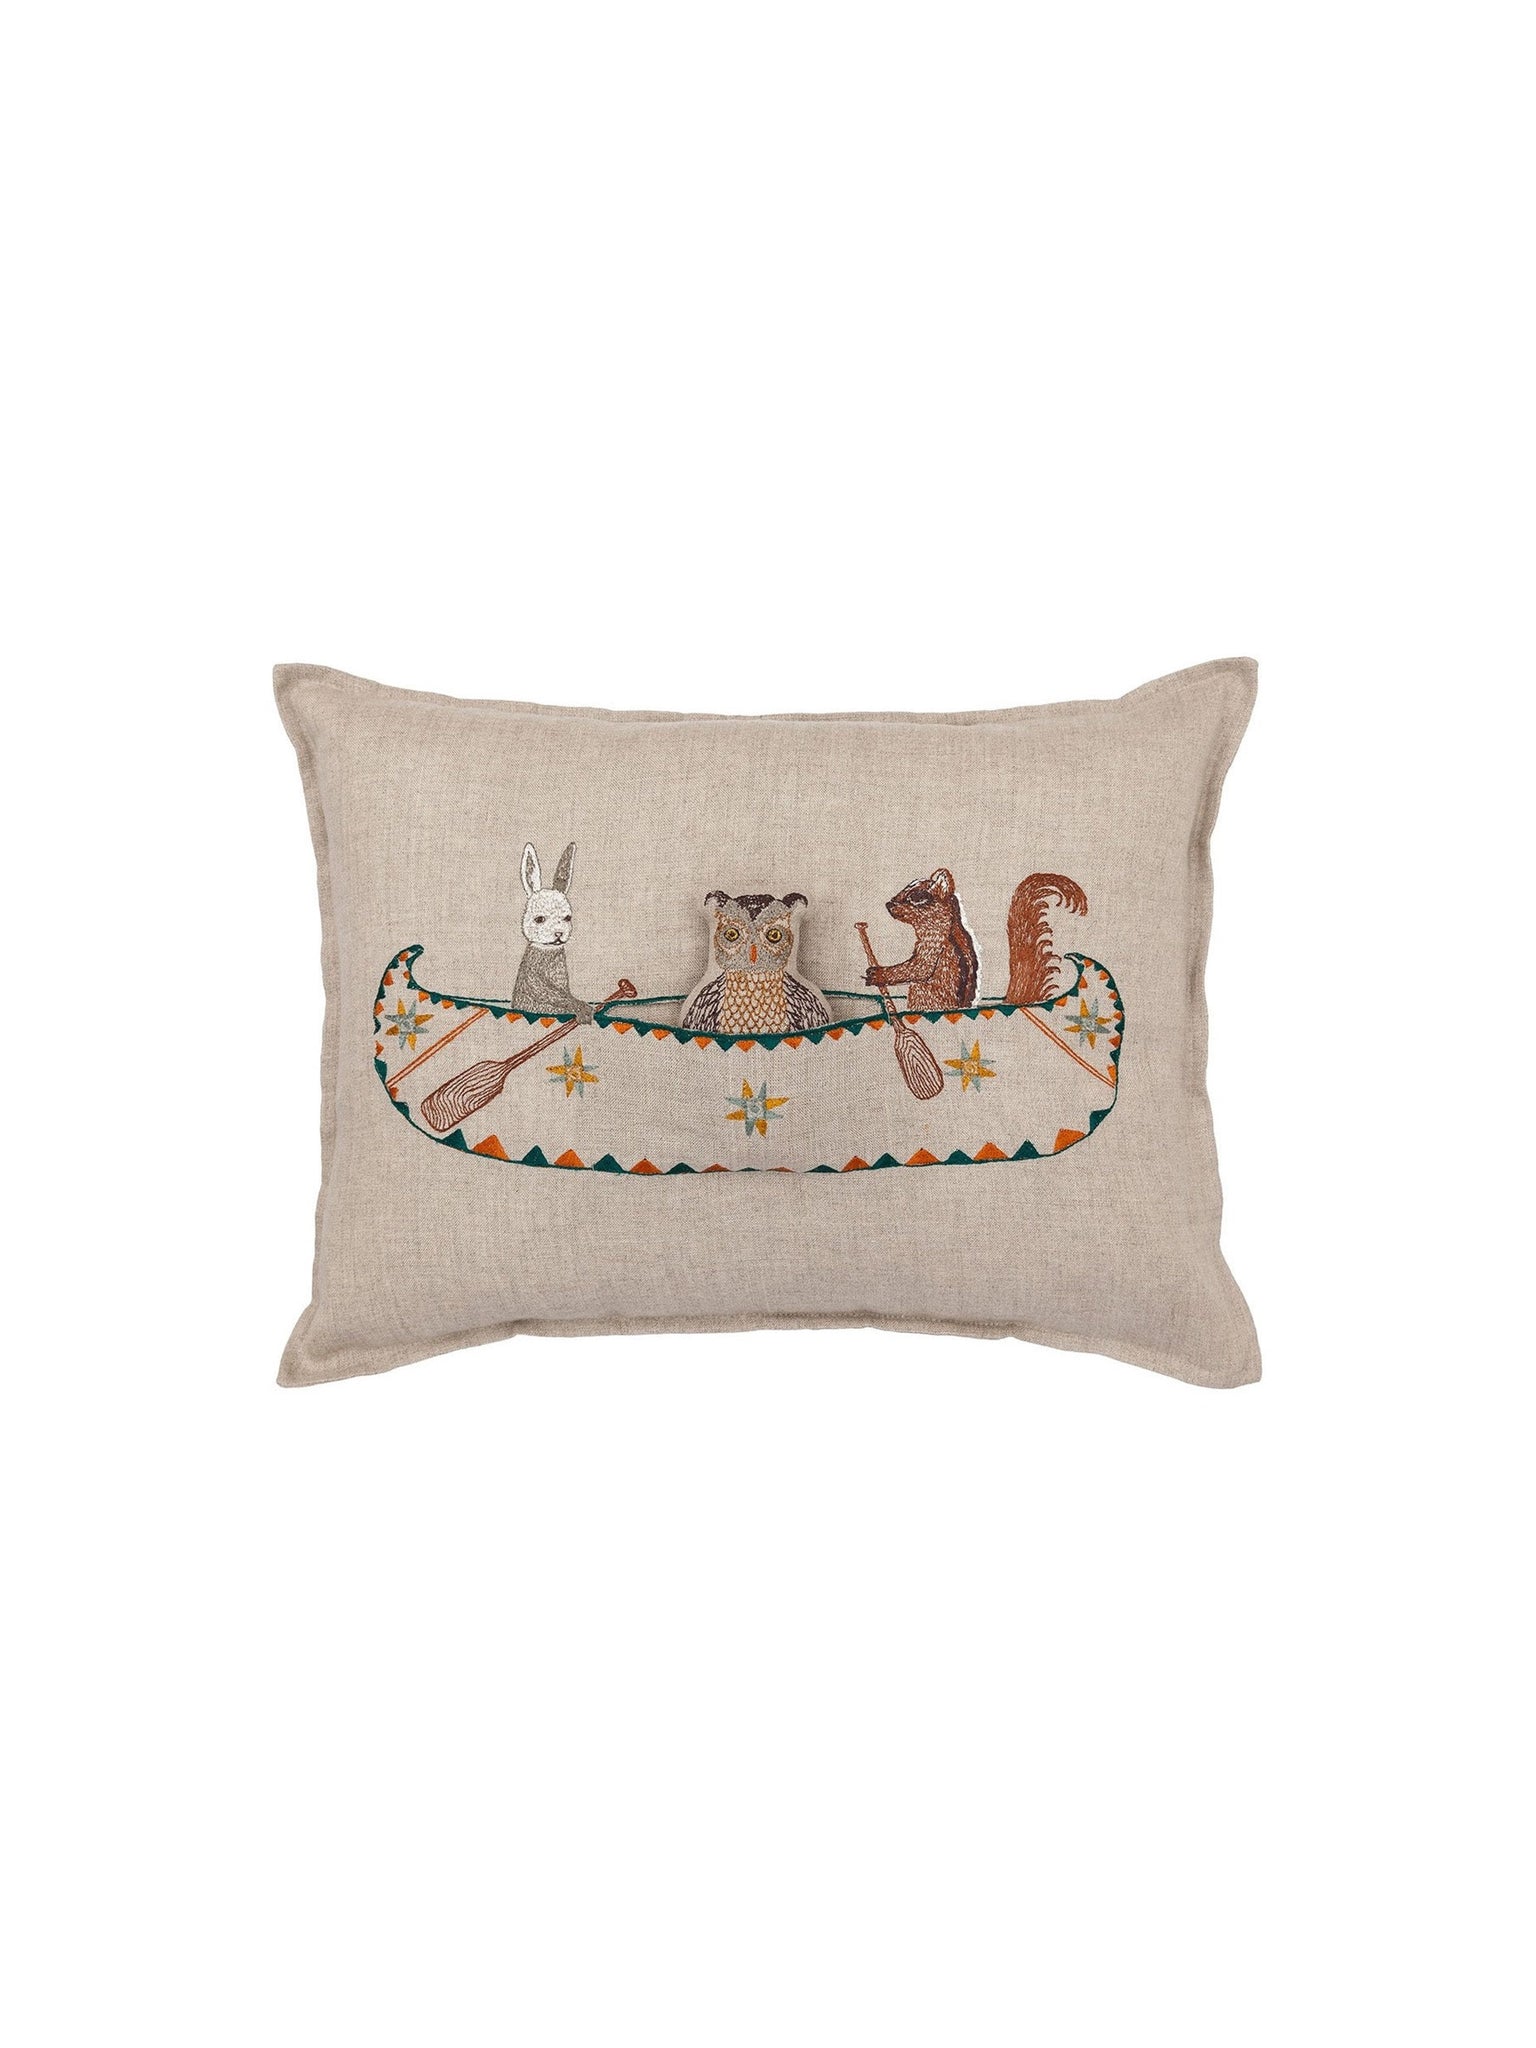 Coral & Tusk Friends Canoe Pocket Pillow Weston Table